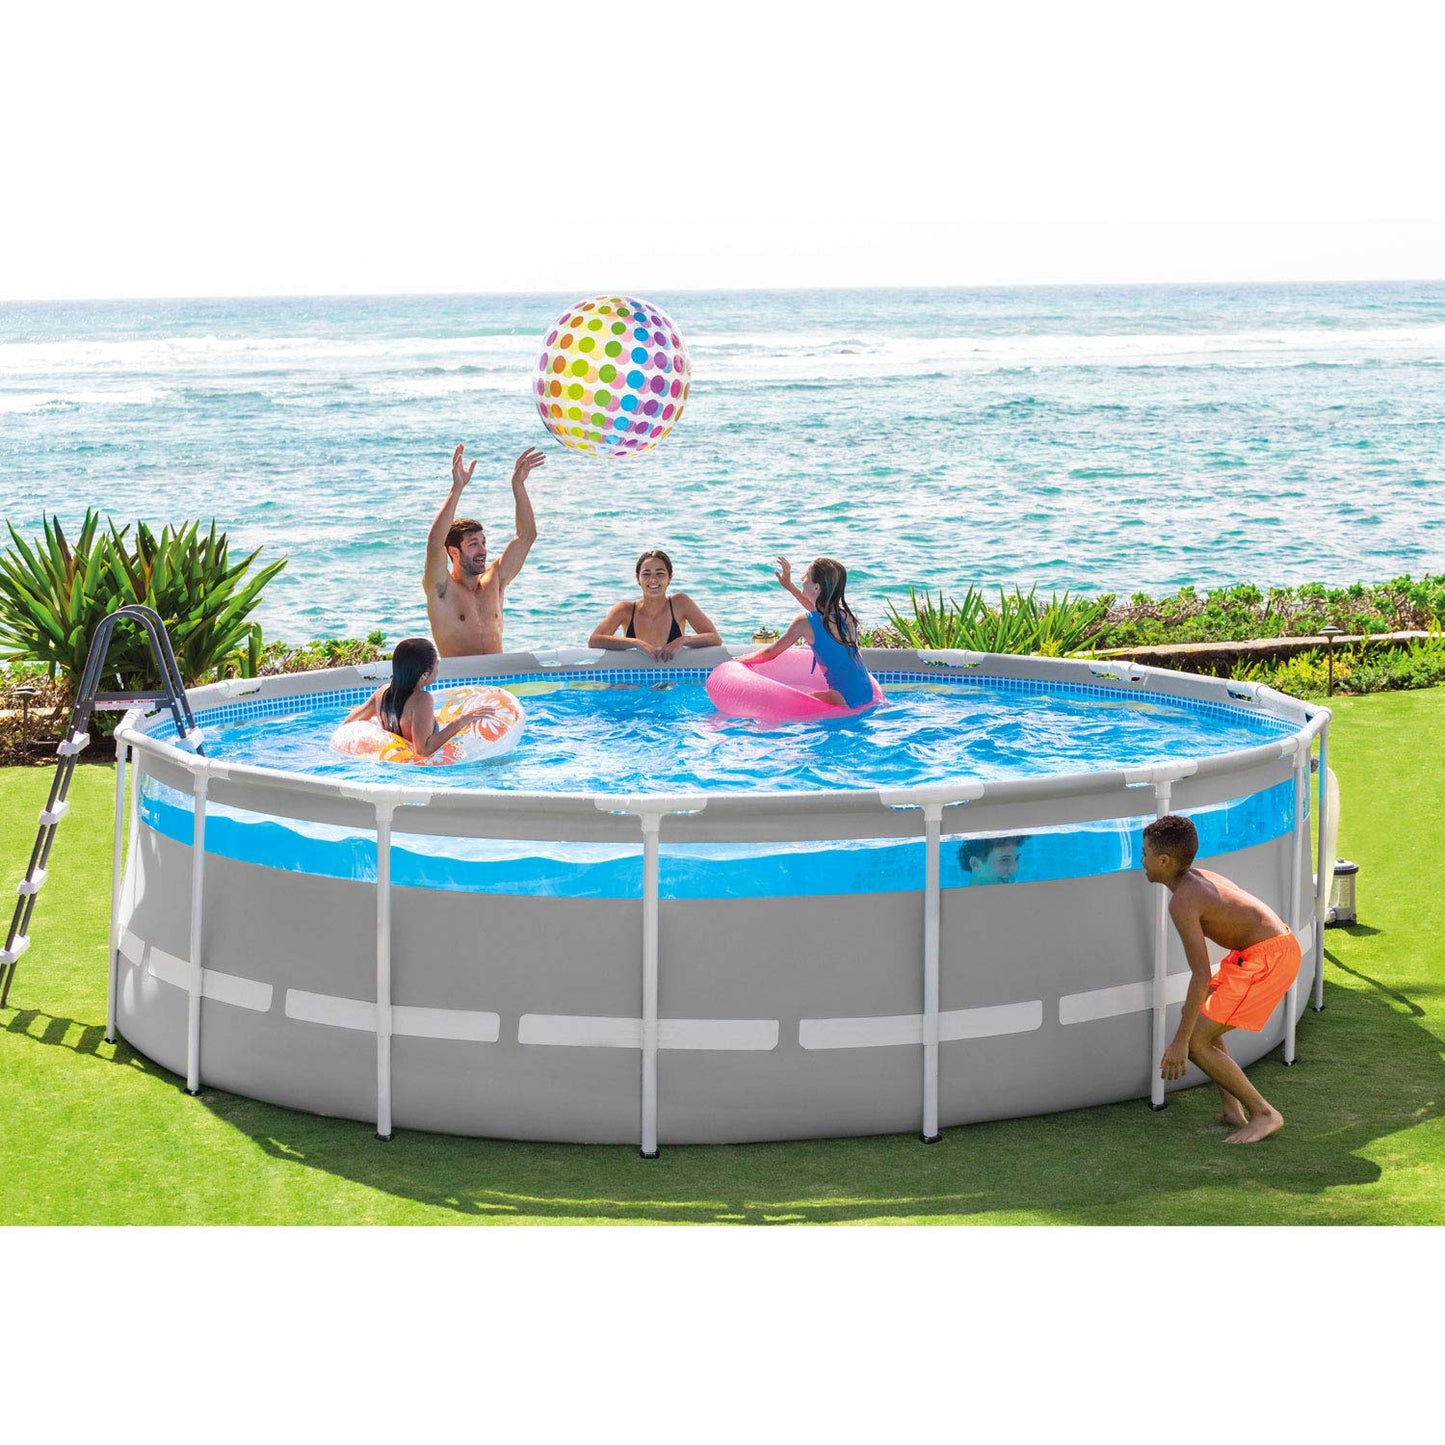 Intex 26729EH 16 Foot by 48 Inch Clearview Prism Frame Above Ground Swimming Pool with Filter Pump, Ladder, Cover, Ground Cloth & Robot Vacuum Cleaner